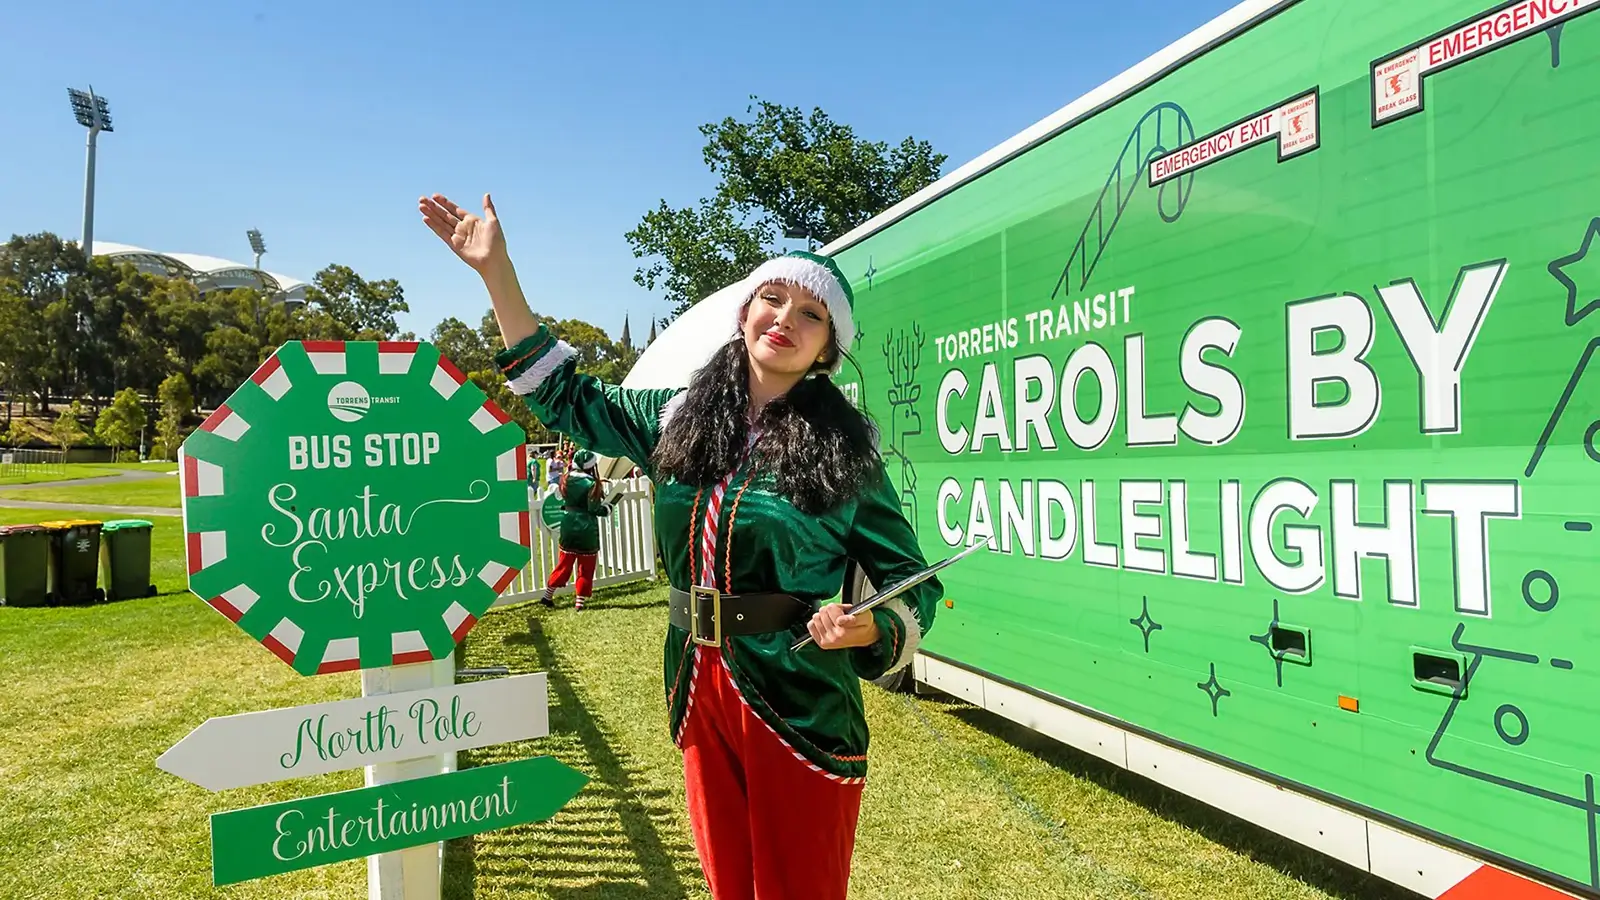 Event signage for Torrens Transit Carols by Candelight Event, bus stop sign with worker in elf costume.